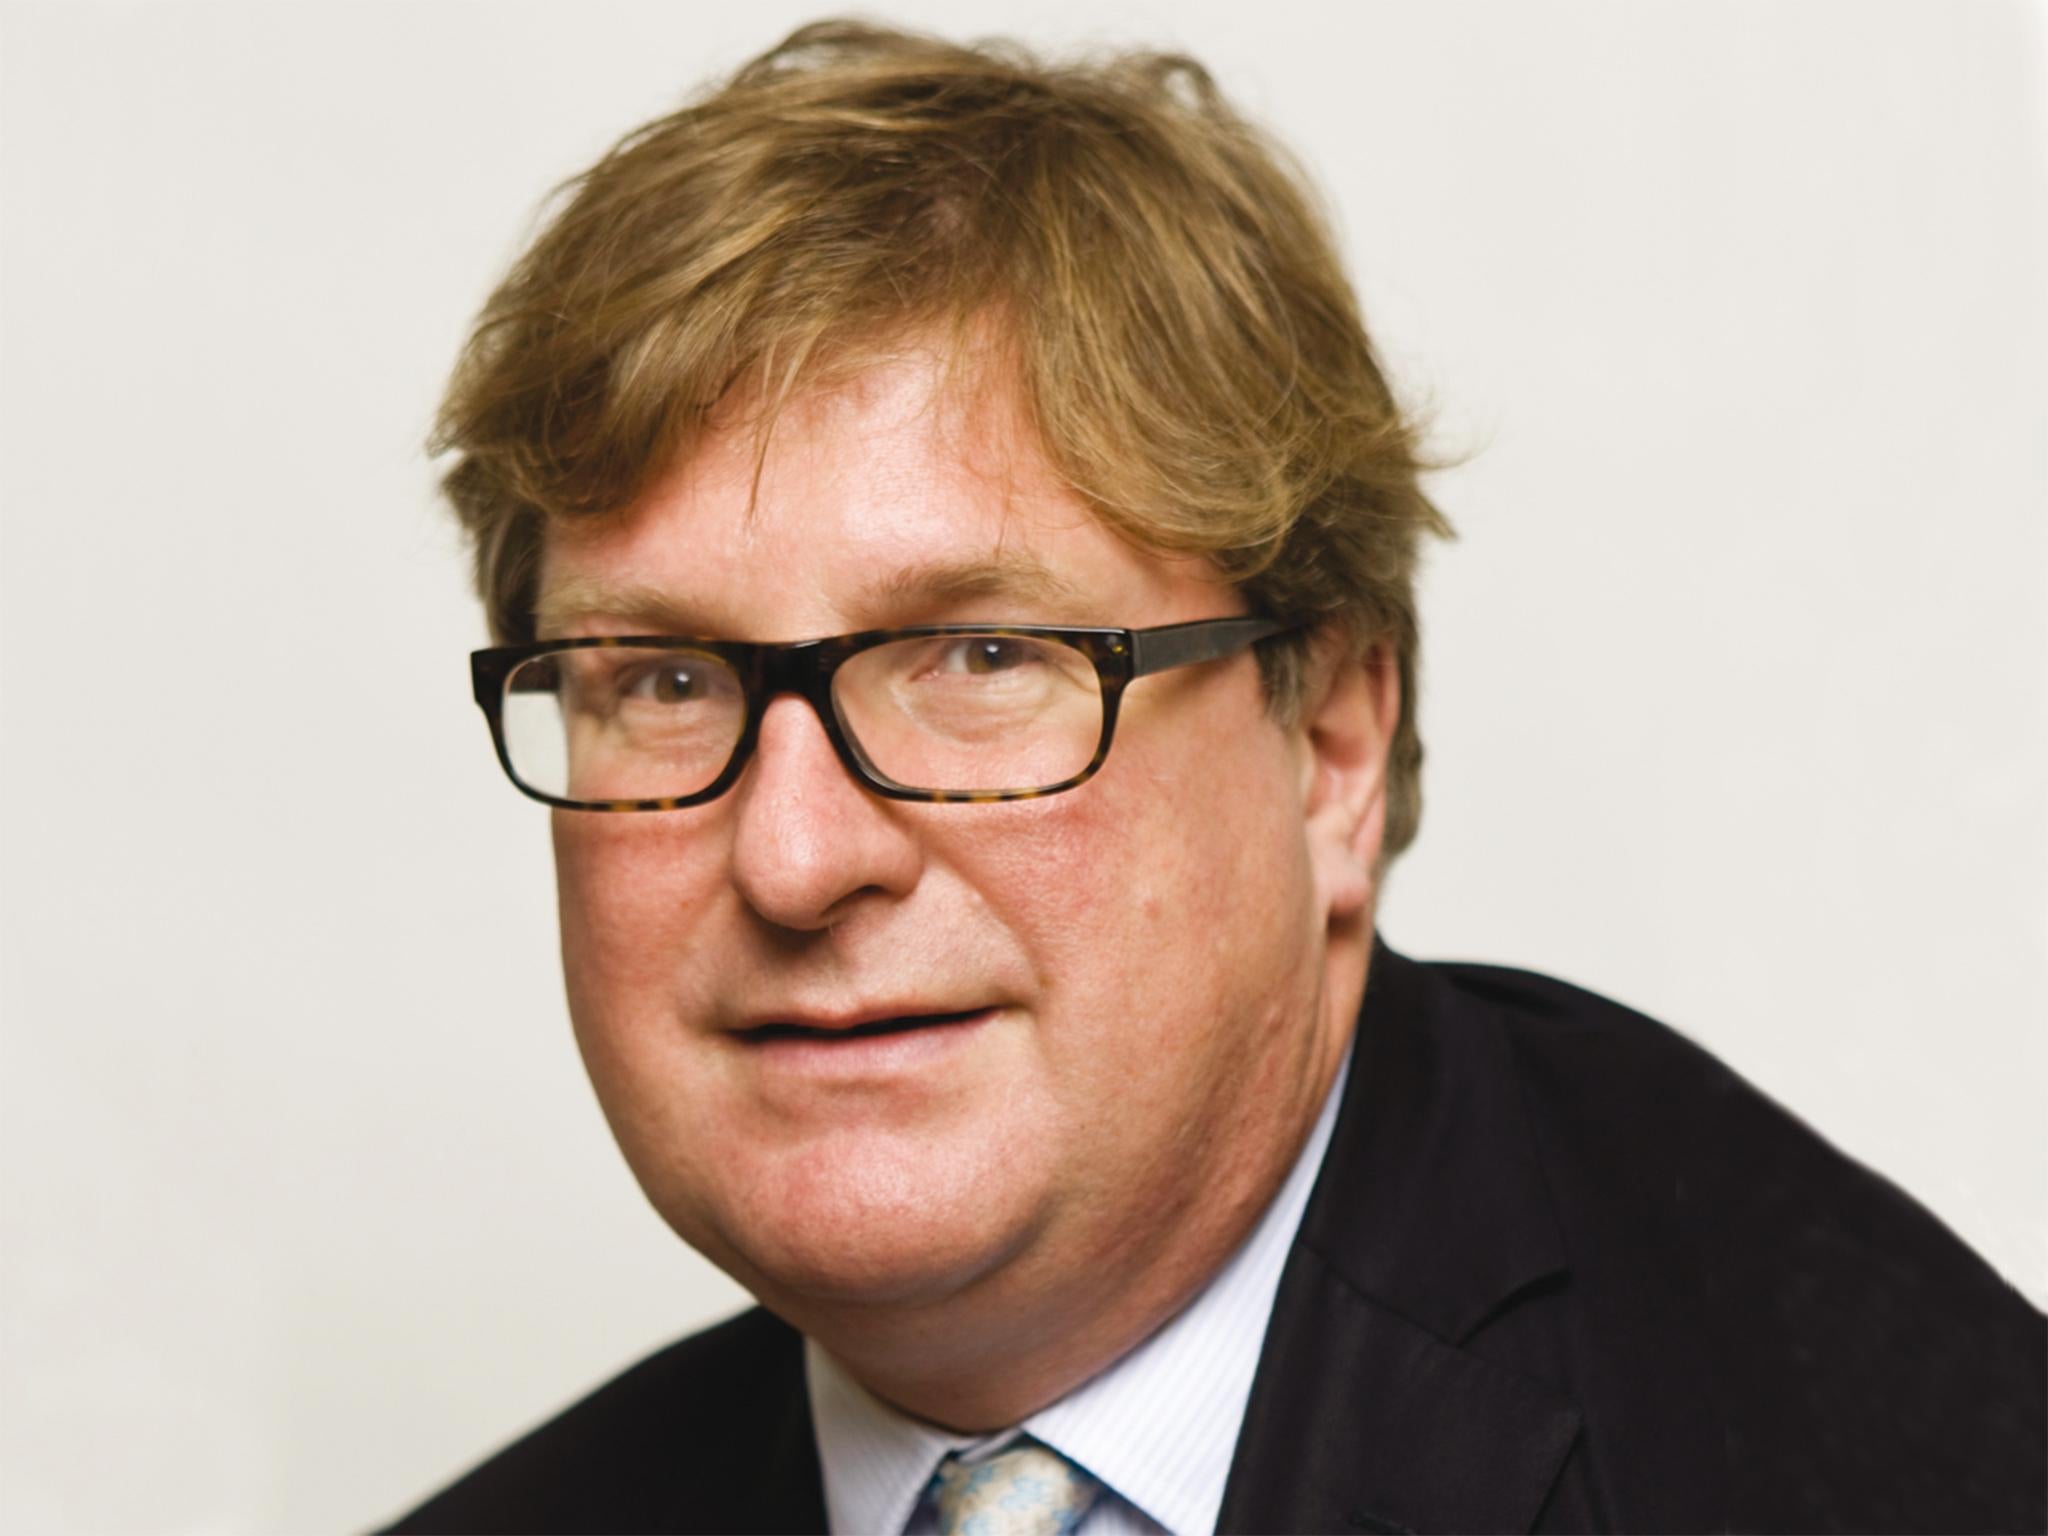 Crispin Odey is betting that the economy is heading for recession